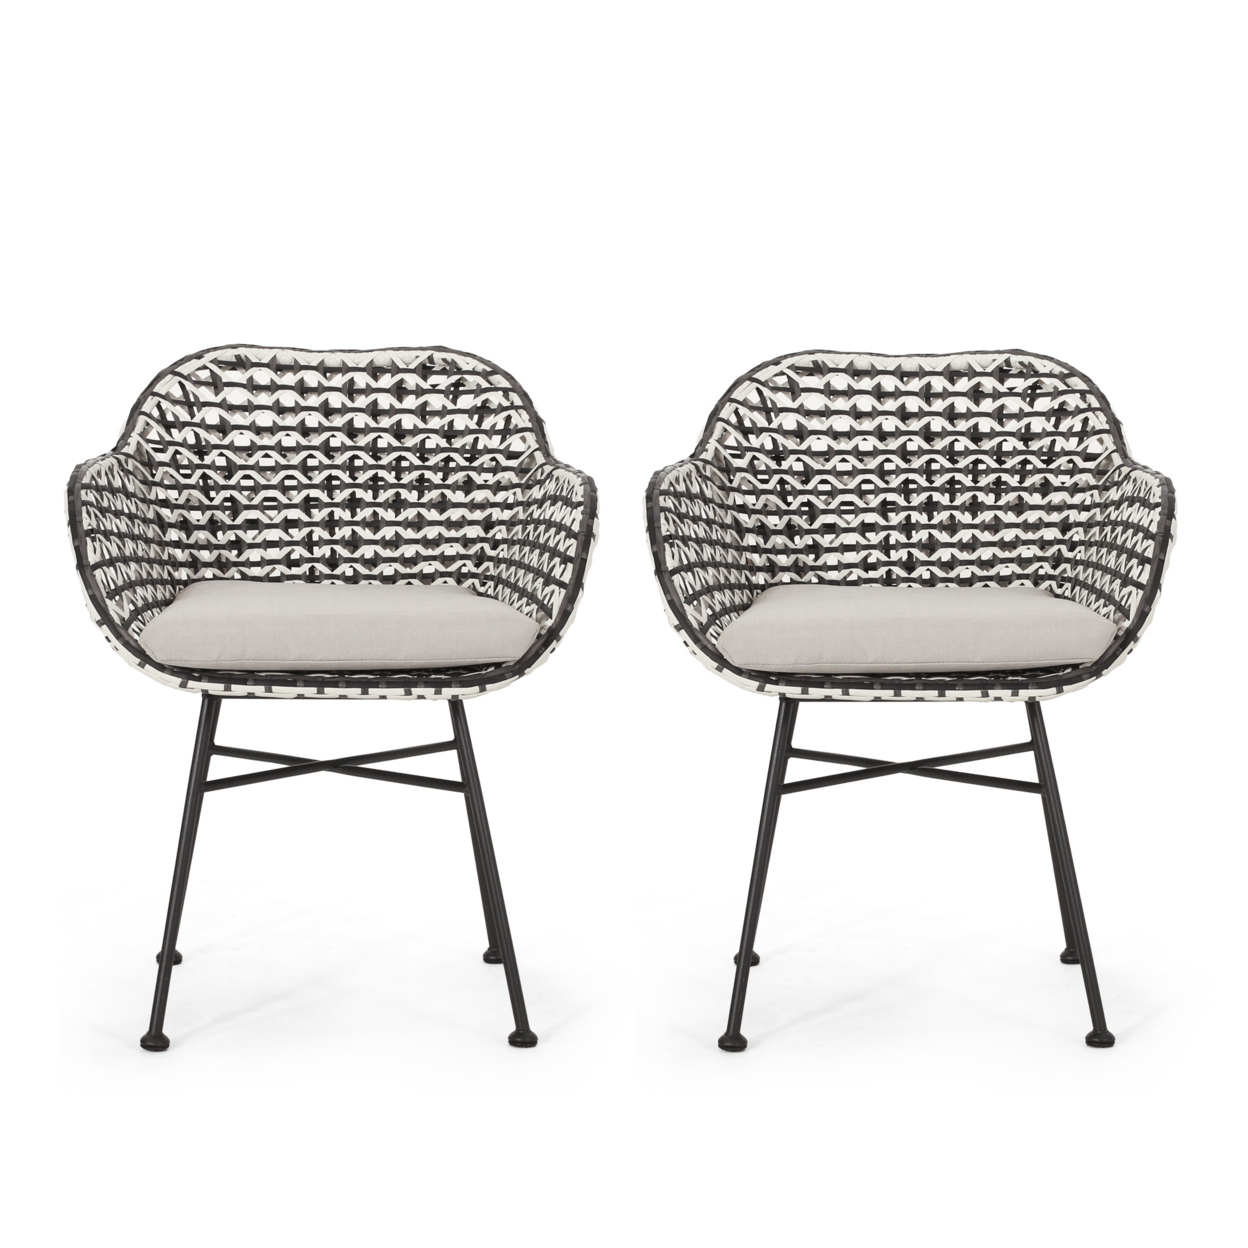 Jayline Outdoor Wicker Chair With Cushion (Set Of 2)